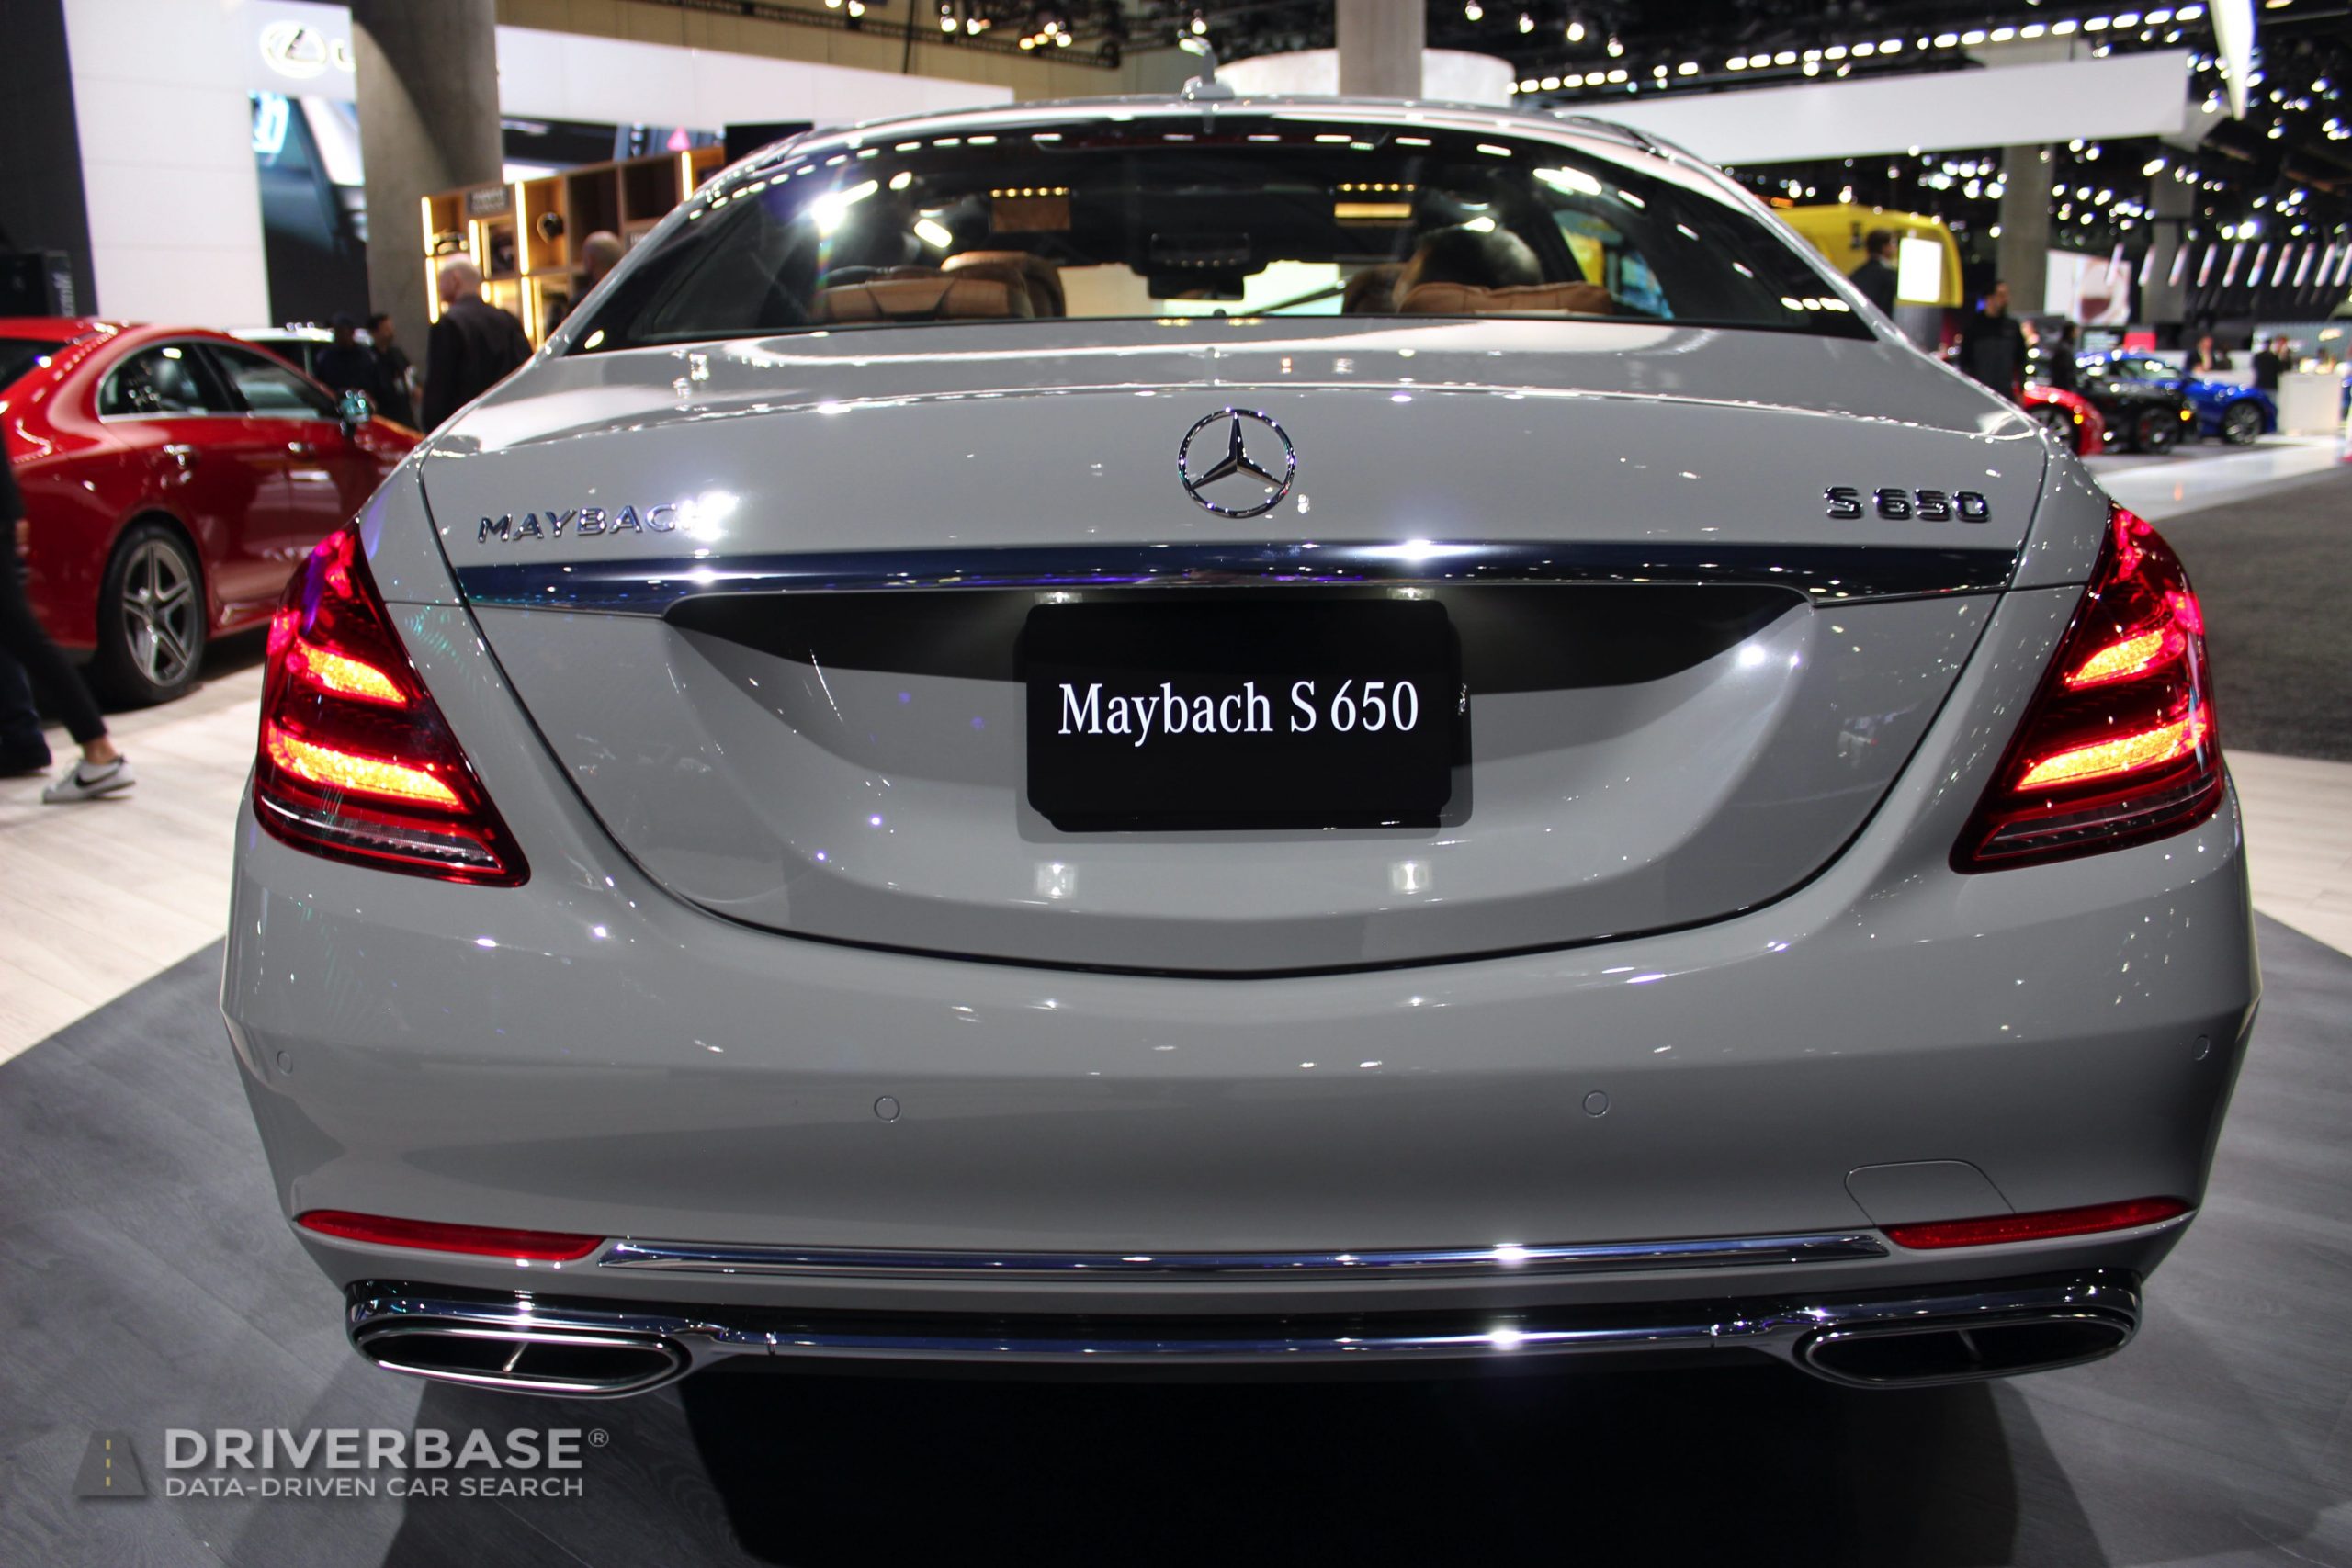 2020 Mercedes-Benz Maybach S650 at the 2019 Los Angeles Auto Show